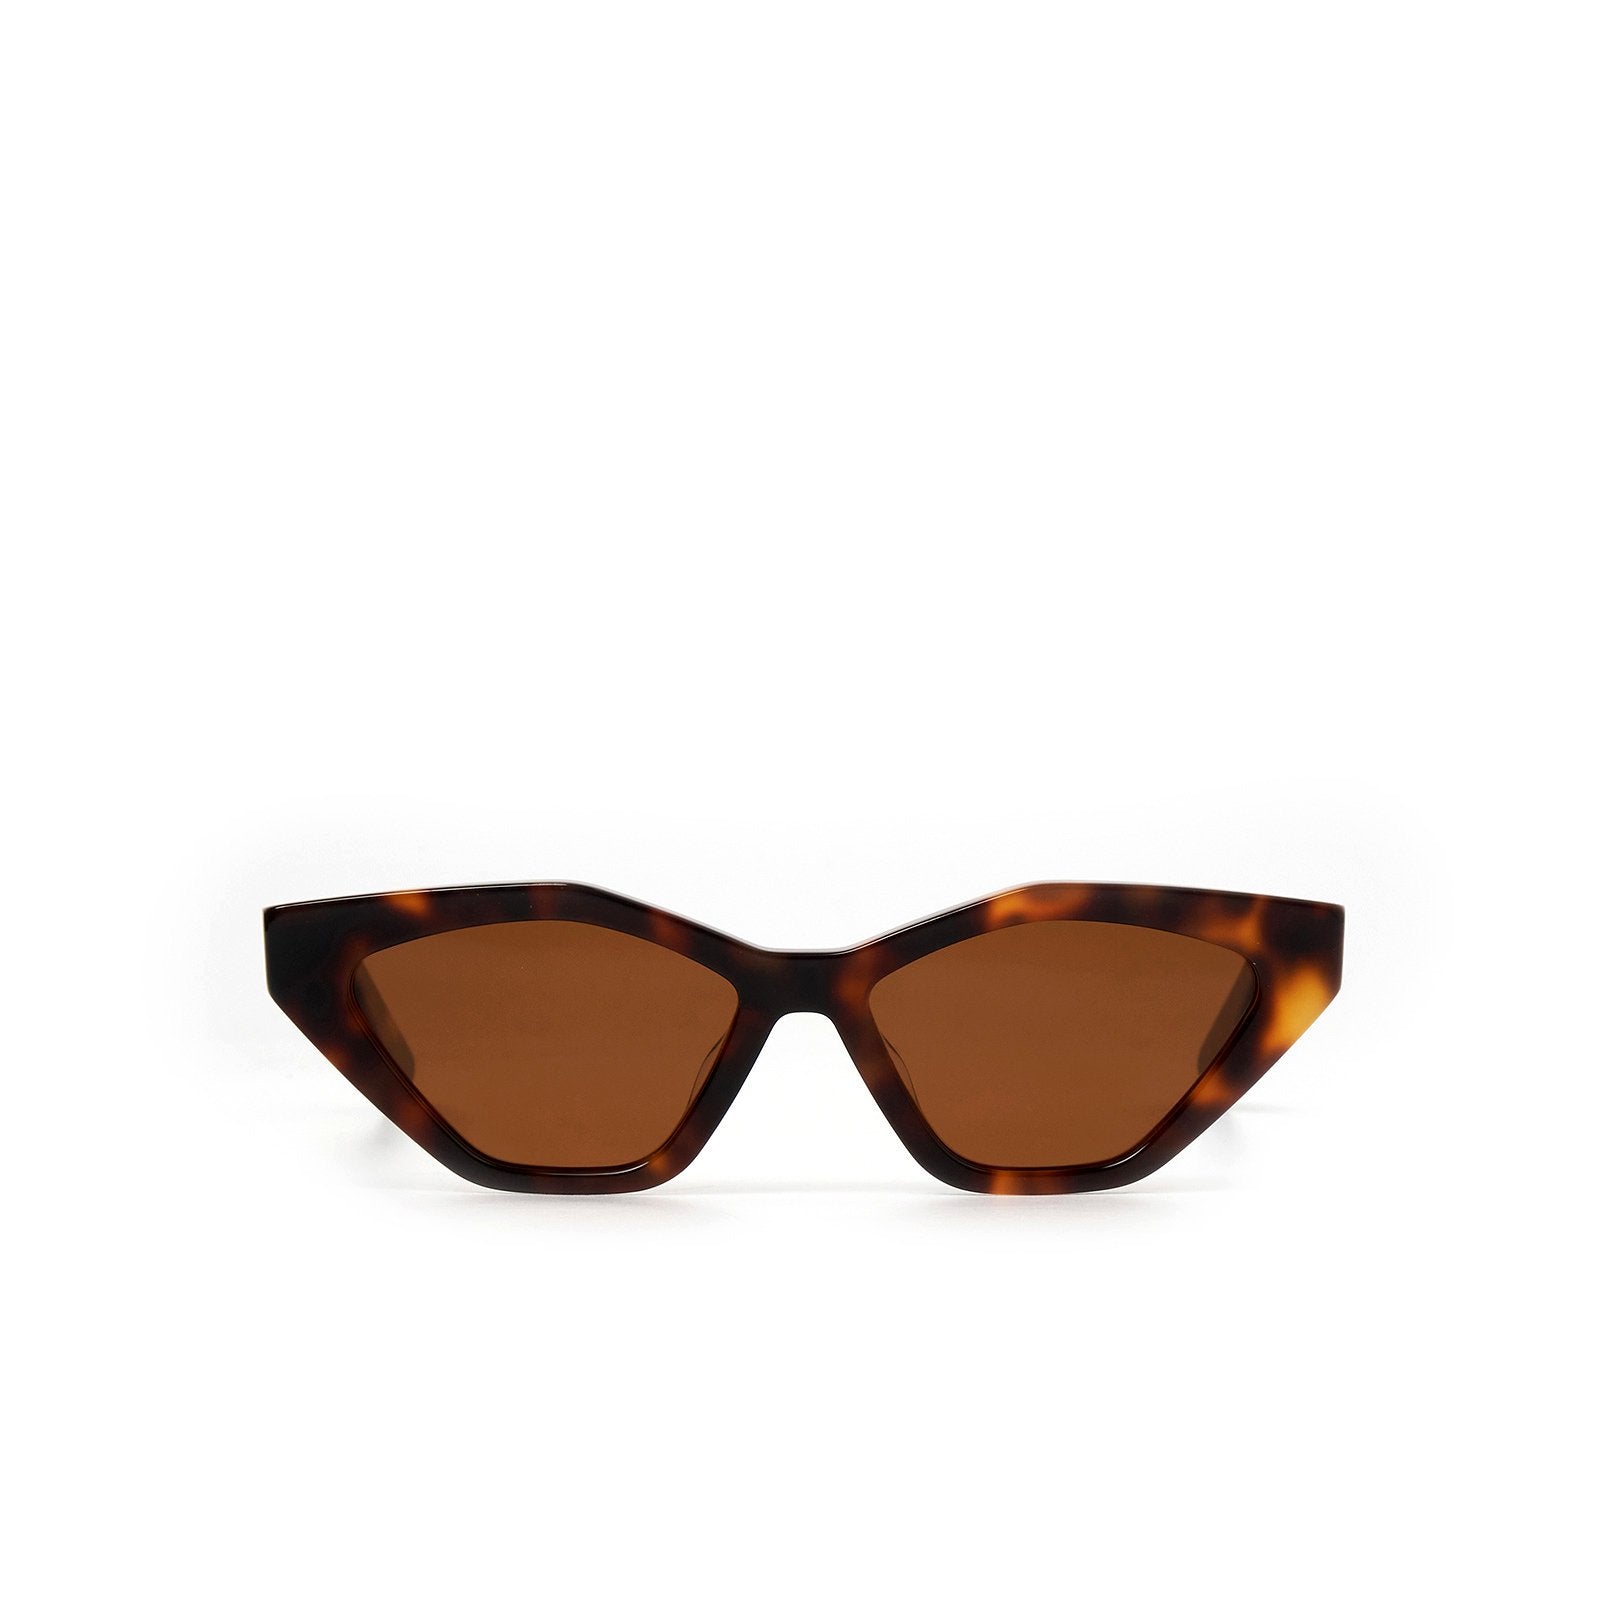 Arms Of Eve Jagger sunglasses, retro design with brown tortoise frames